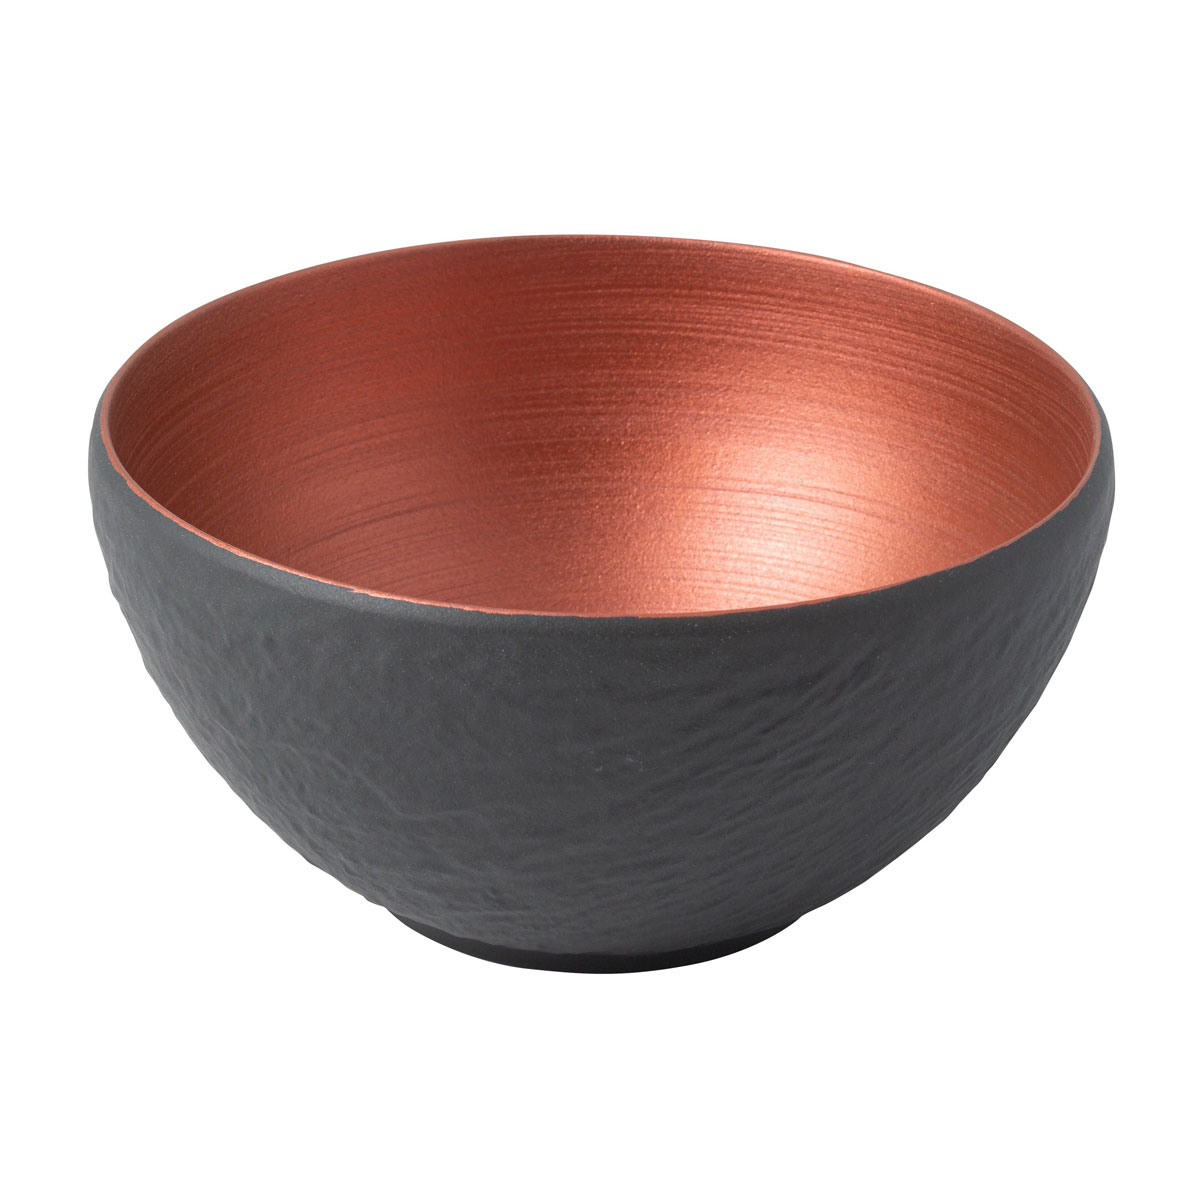 Villeroy and Boch Manufacture Rock Glow Rice Bowl